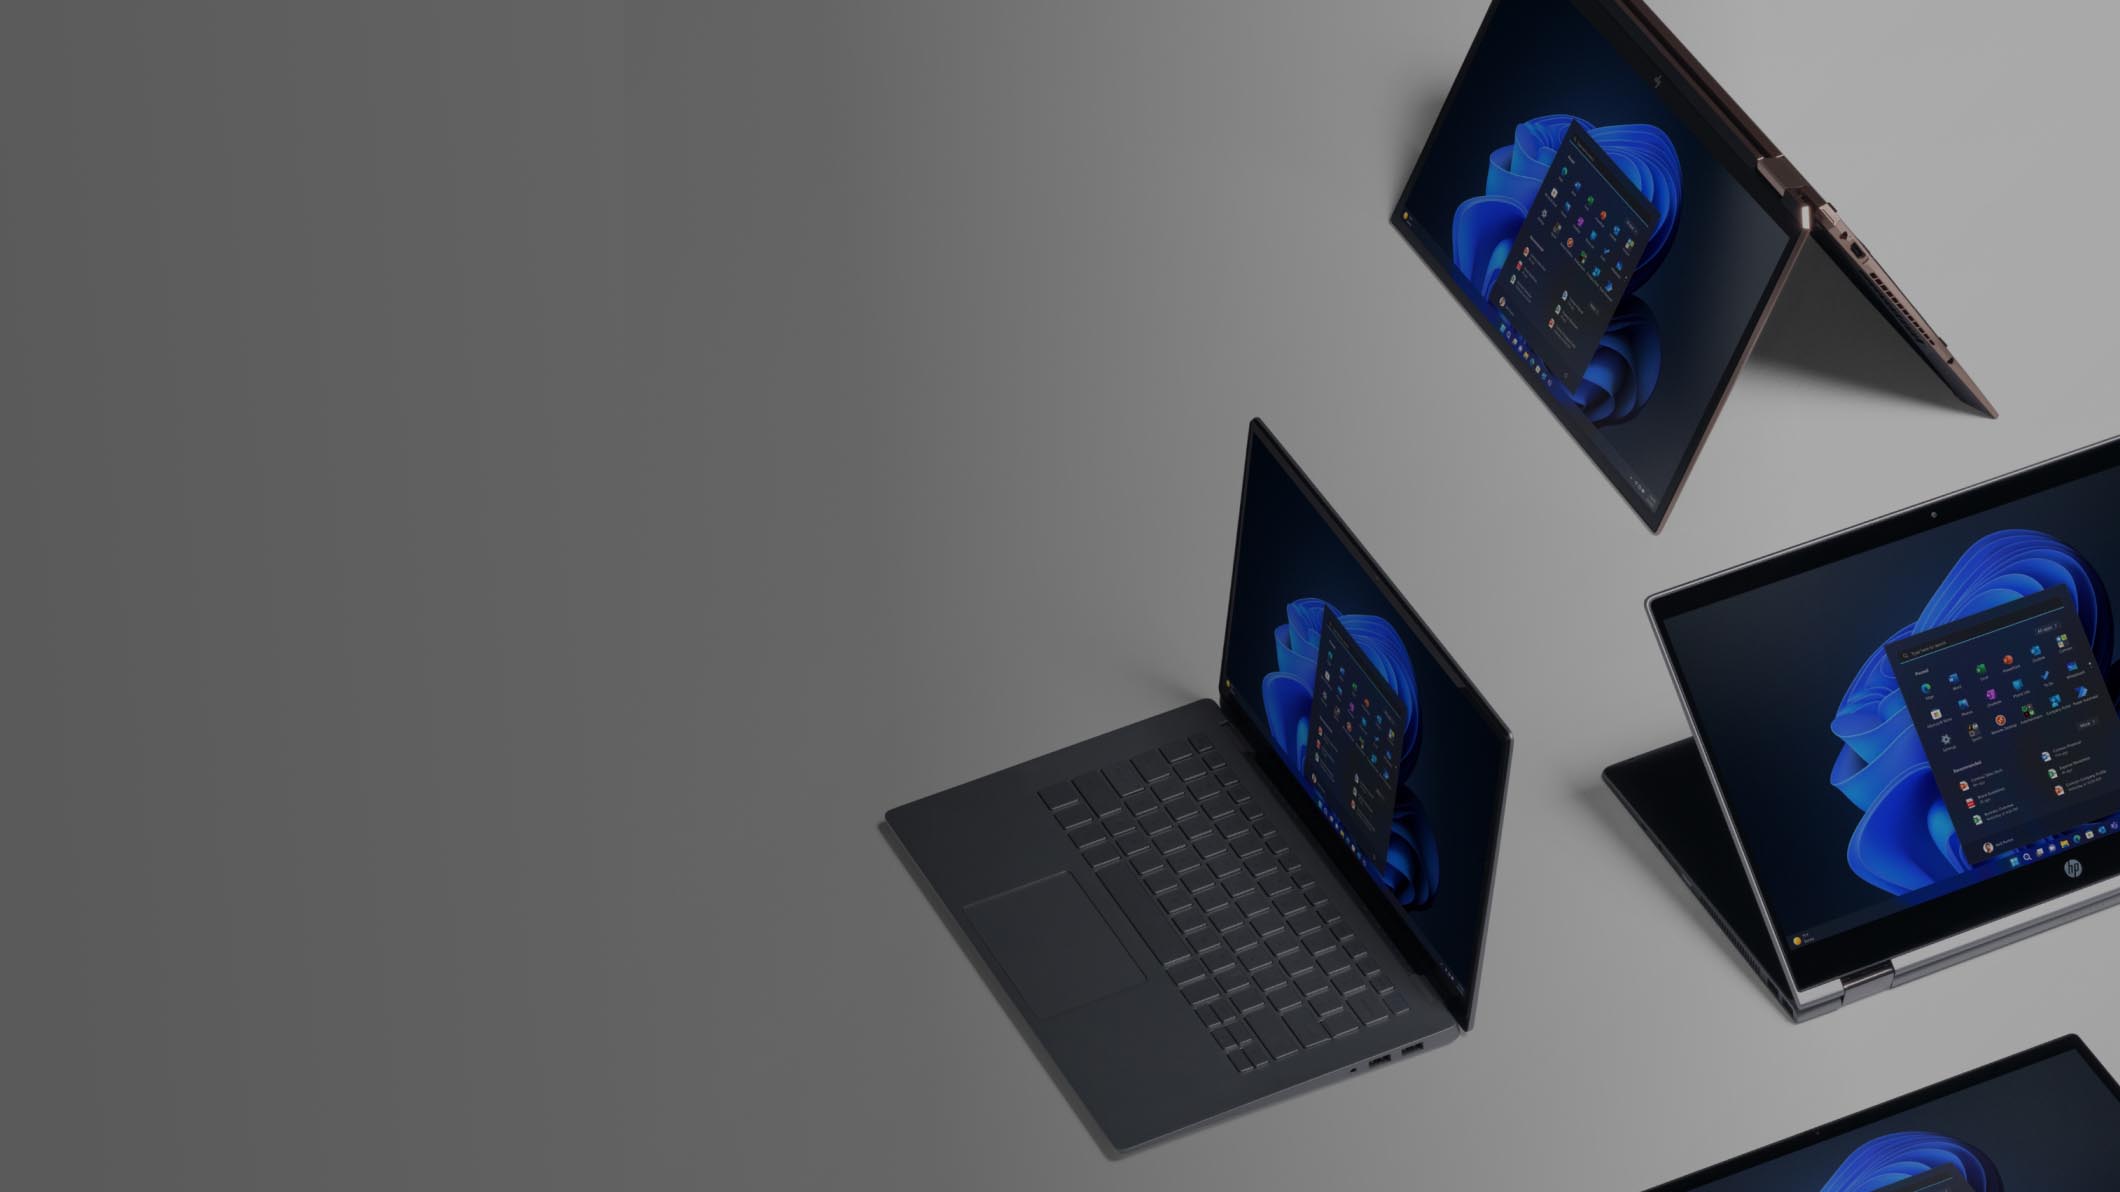 Four devices displaying the Windows 11 start screen